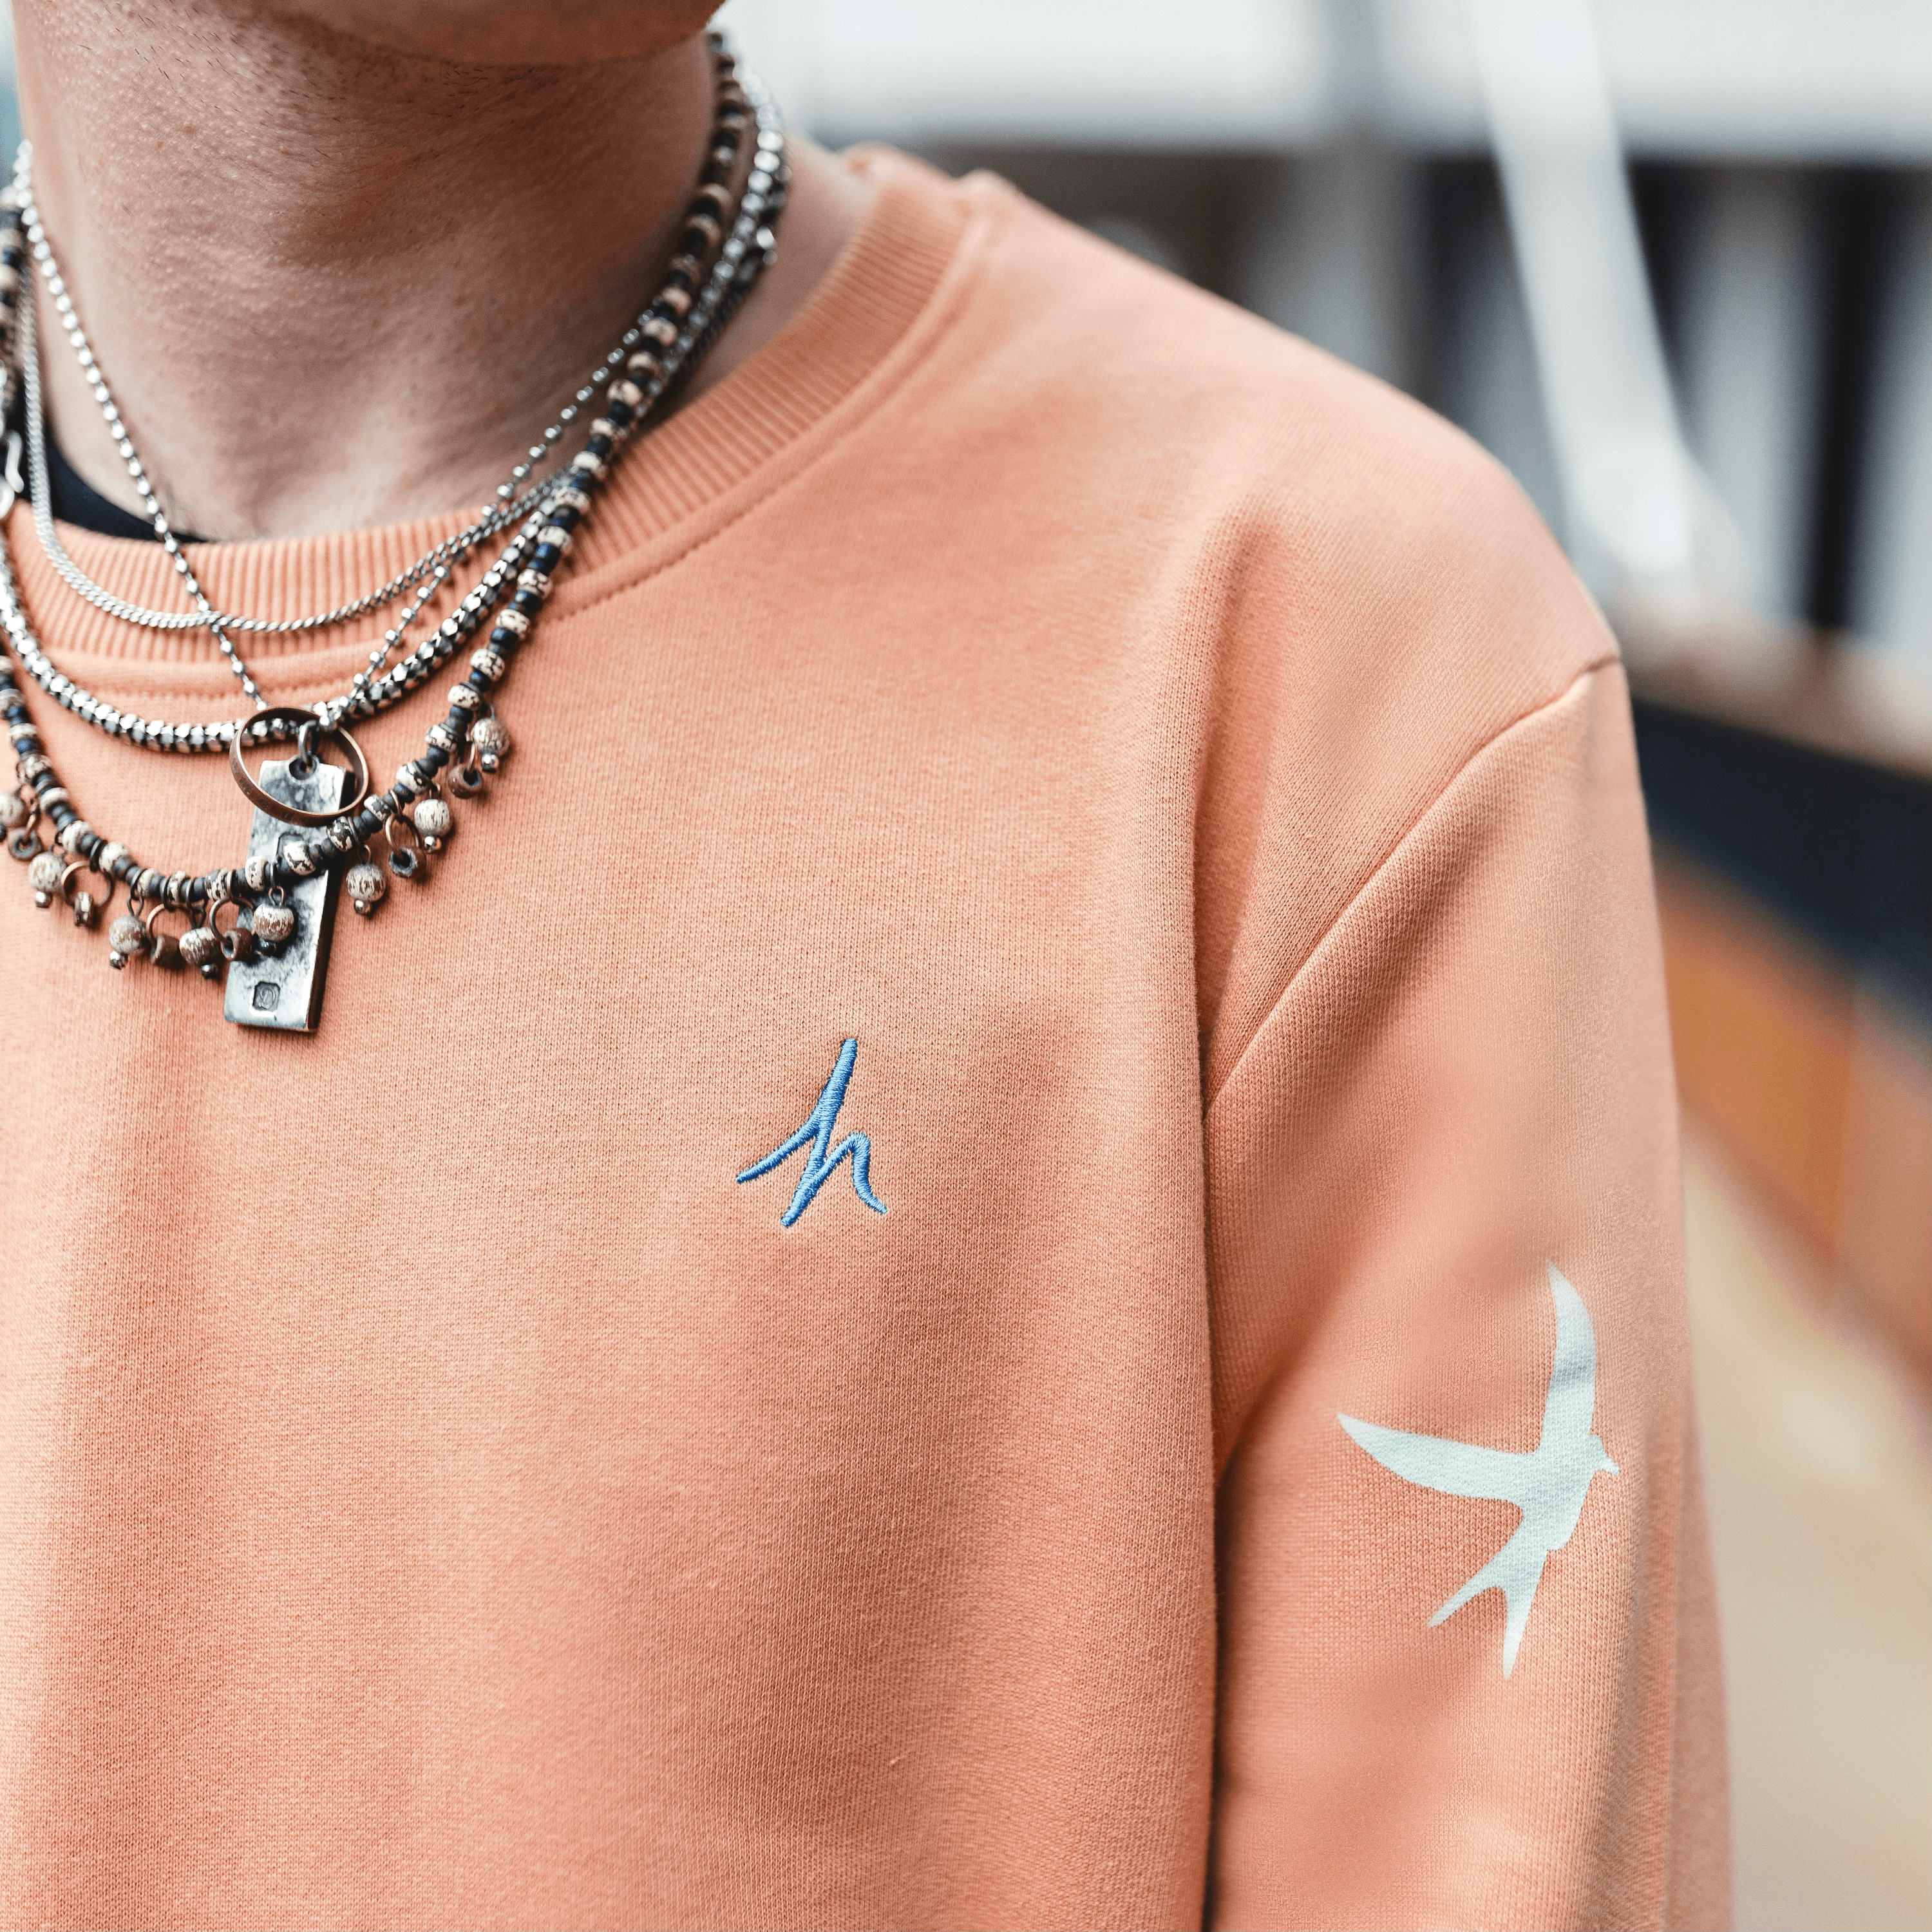 h clothing - close up of male model wearing pastel orange sweatshirt with blue h logo and colourful bird on left arm